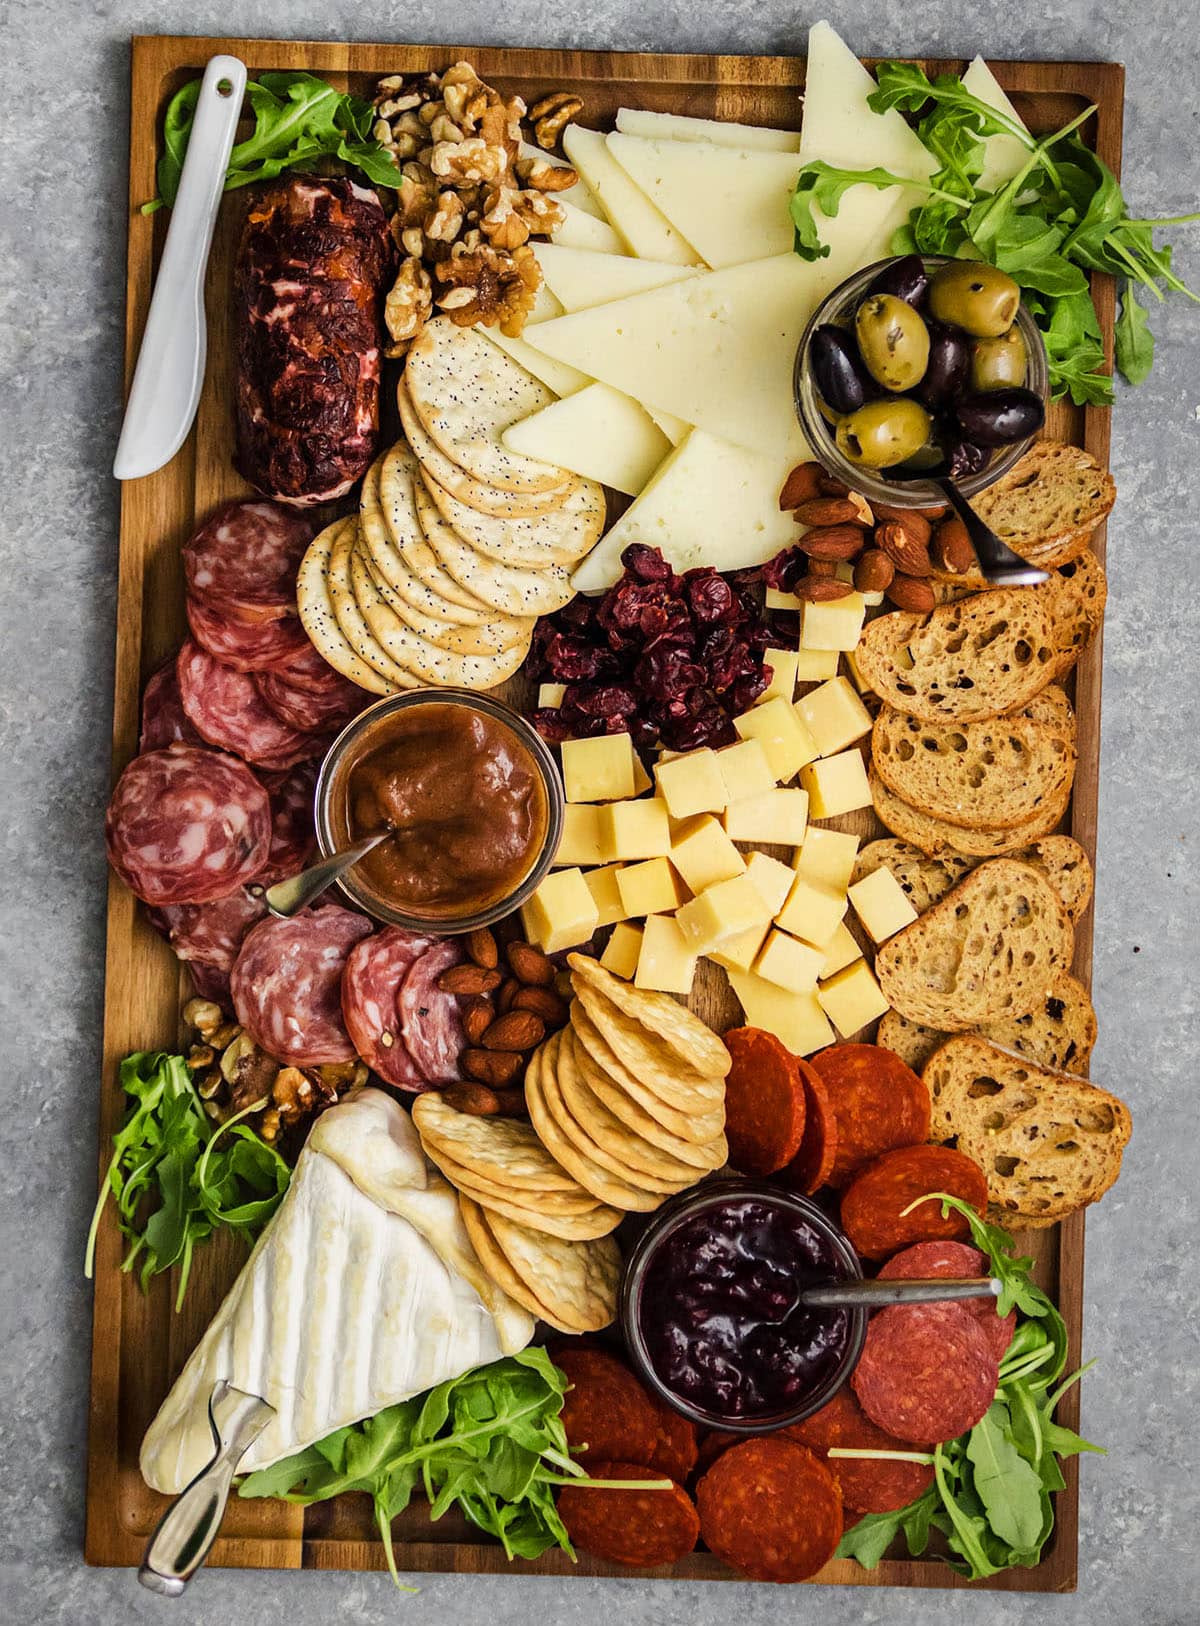 Overhead view of a variety of cheeses arranged on a wood cutting board.